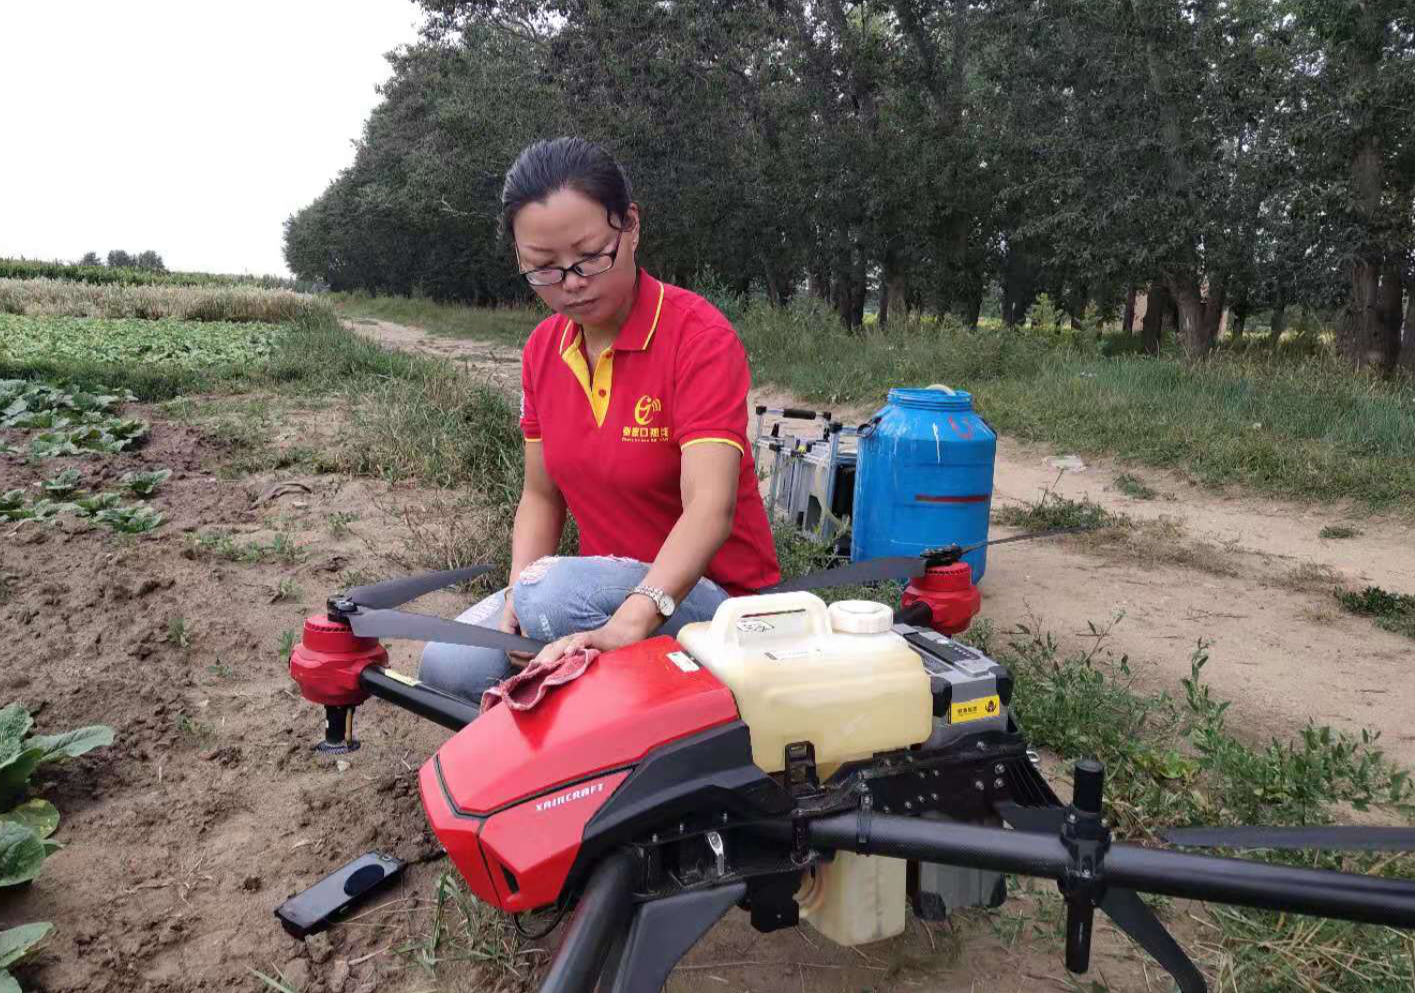 Meet the Female Drone Pilot in Agriculture: Empowering Rural Community to Tackle Extreme Poverty